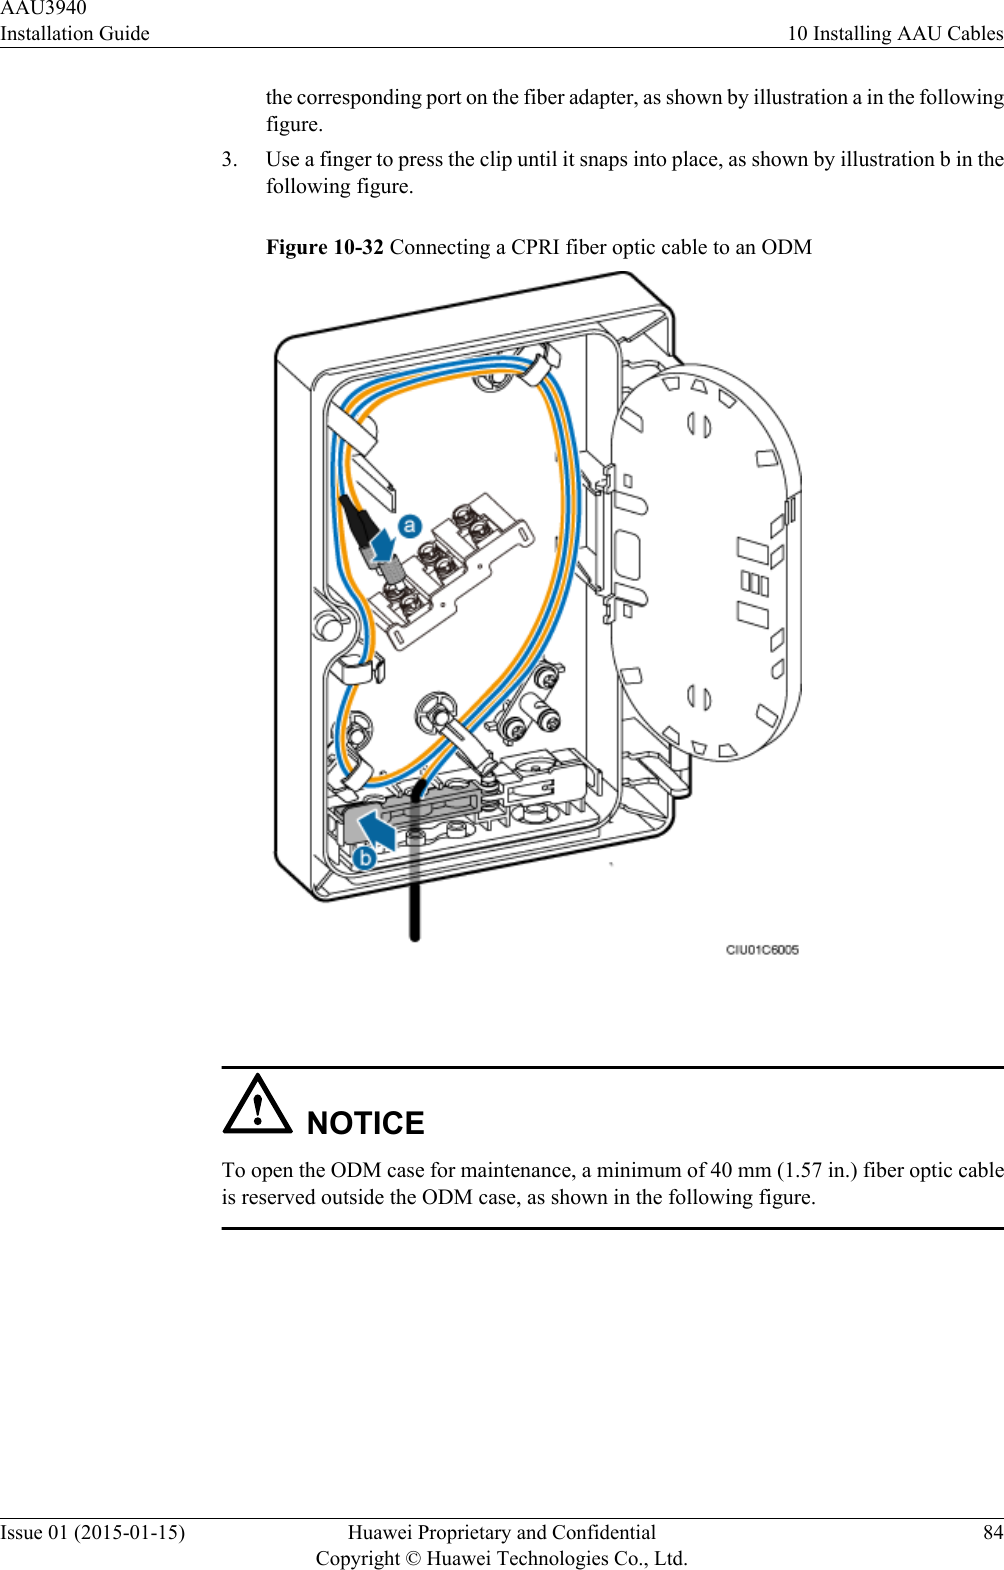 the corresponding port on the fiber adapter, as shown by illustration a in the followingfigure.3. Use a finger to press the clip until it snaps into place, as shown by illustration b in thefollowing figure.Figure 10-32 Connecting a CPRI fiber optic cable to an ODM NOTICETo open the ODM case for maintenance, a minimum of 40 mm (1.57 in.) fiber optic cableis reserved outside the ODM case, as shown in the following figure.AAU3940Installation Guide 10 Installing AAU CablesIssue 01 (2015-01-15) Huawei Proprietary and ConfidentialCopyright © Huawei Technologies Co., Ltd.84